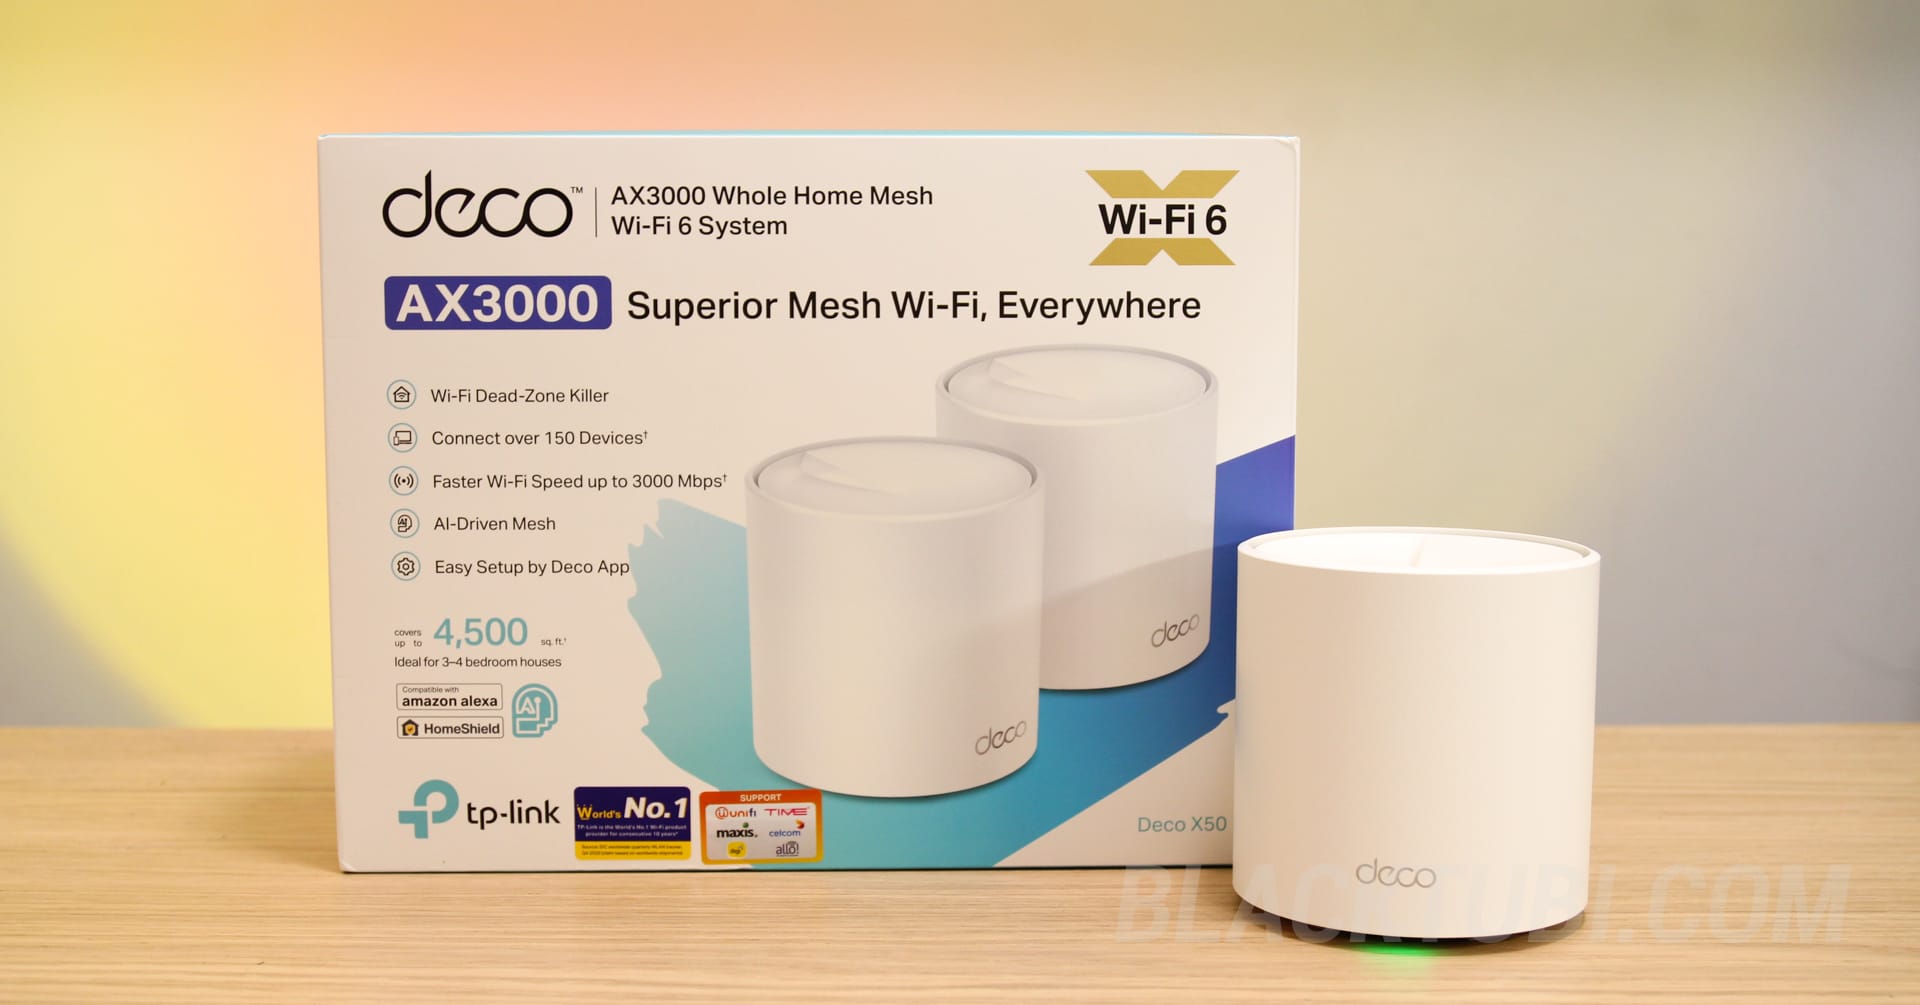 TP-Link Deco W7200 AX3600 (2-pack) Wireless Router Review - Consumer Reports